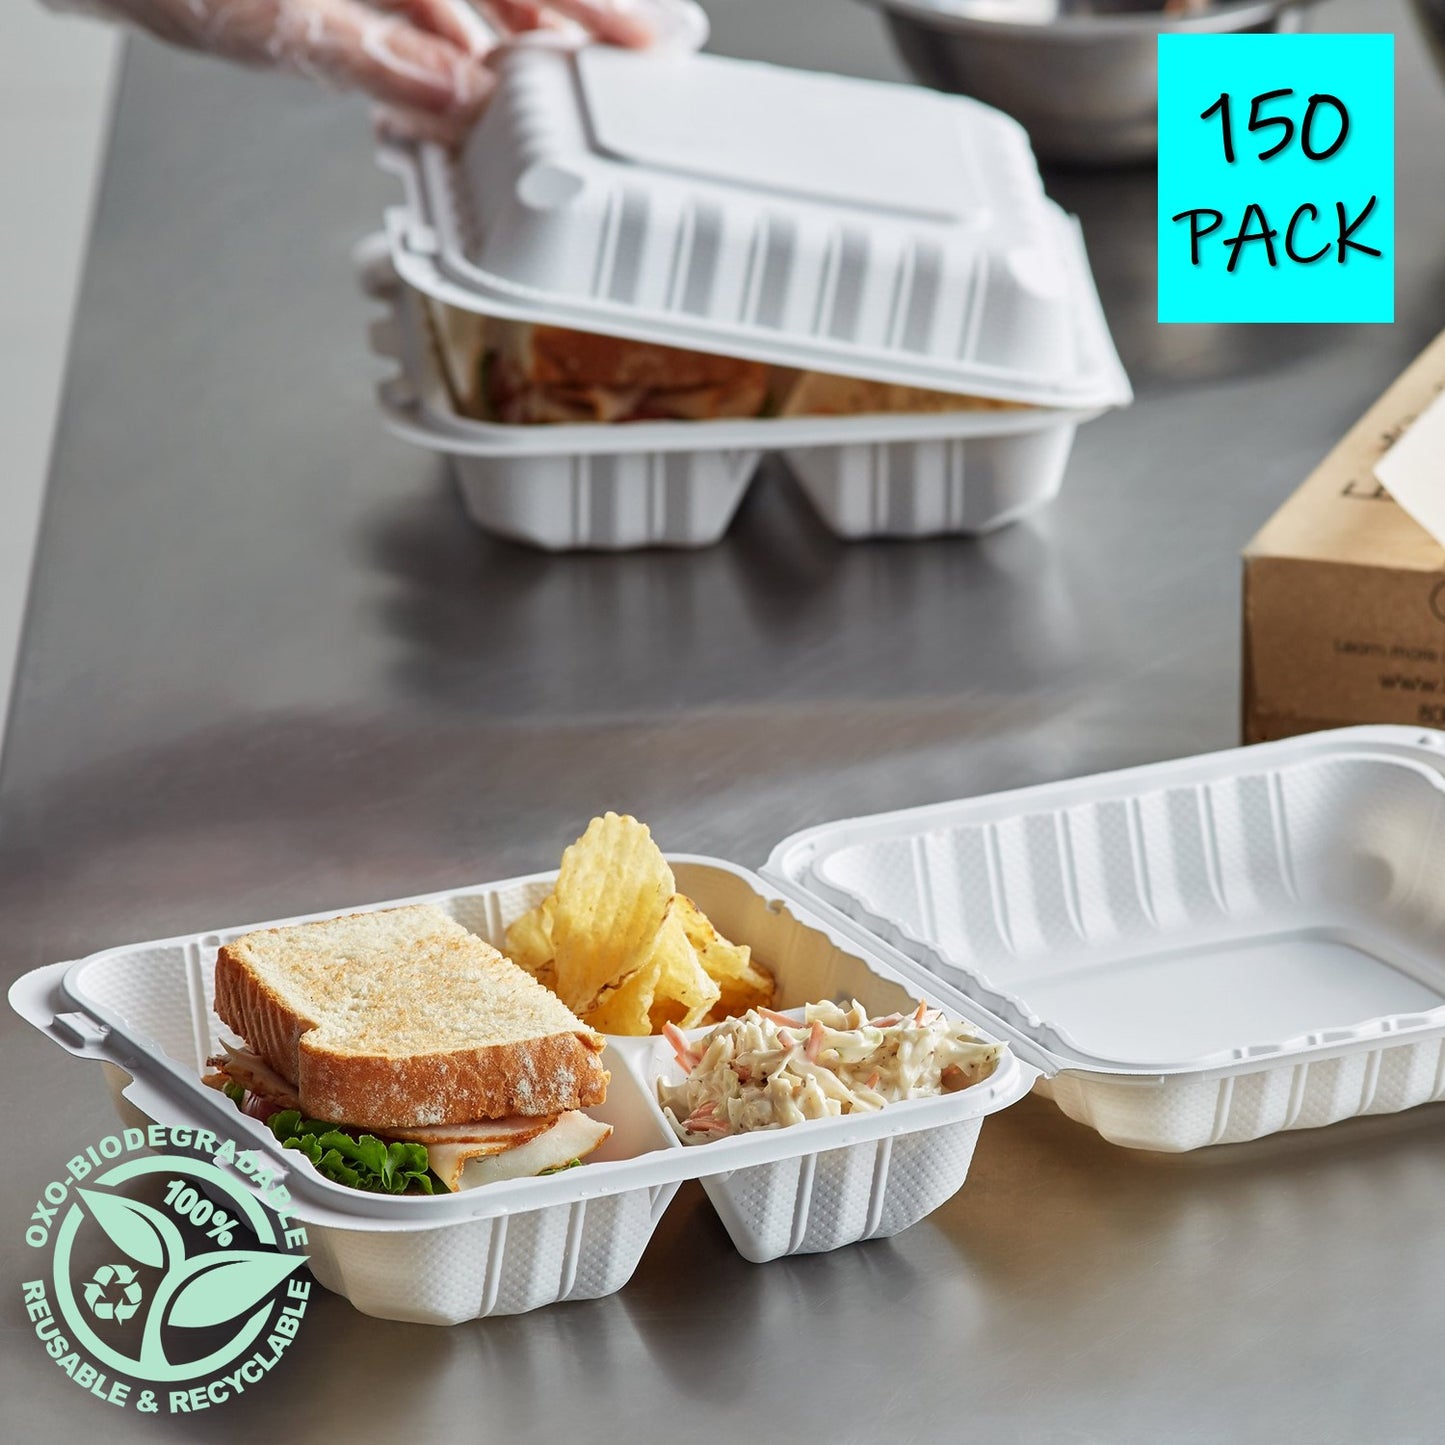 Take Out Clamshell 8" 3 Compartment 8X8X3 Microwaveable Eco-Friendly 150 Pack